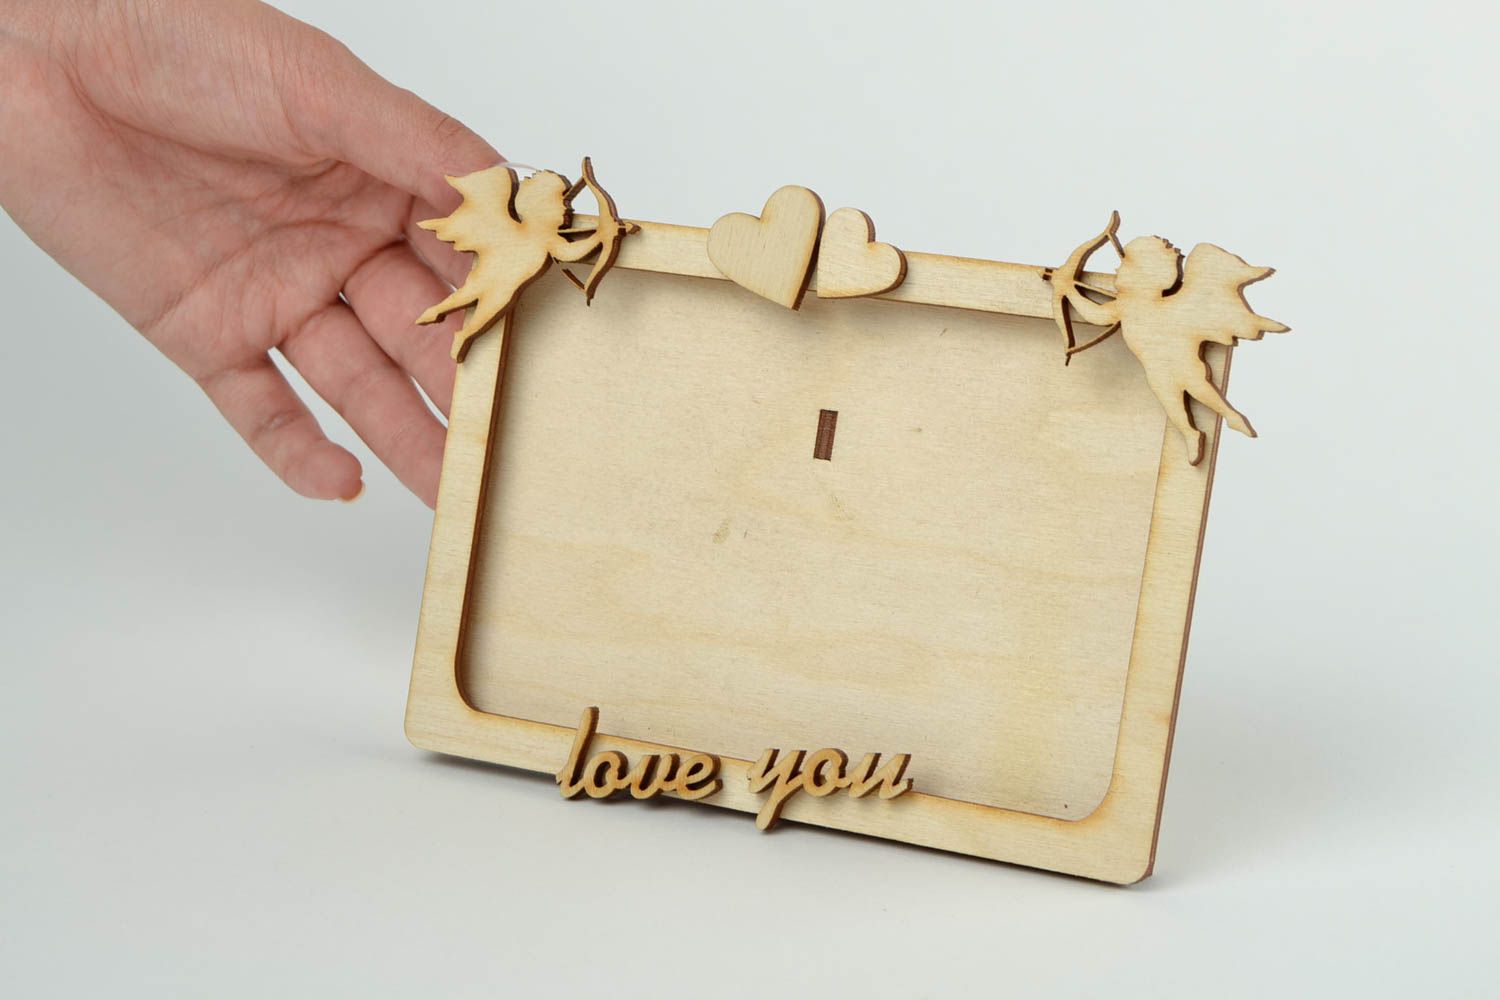 Materials for creative work handmade wooden photo frame for painting home decor photo 2